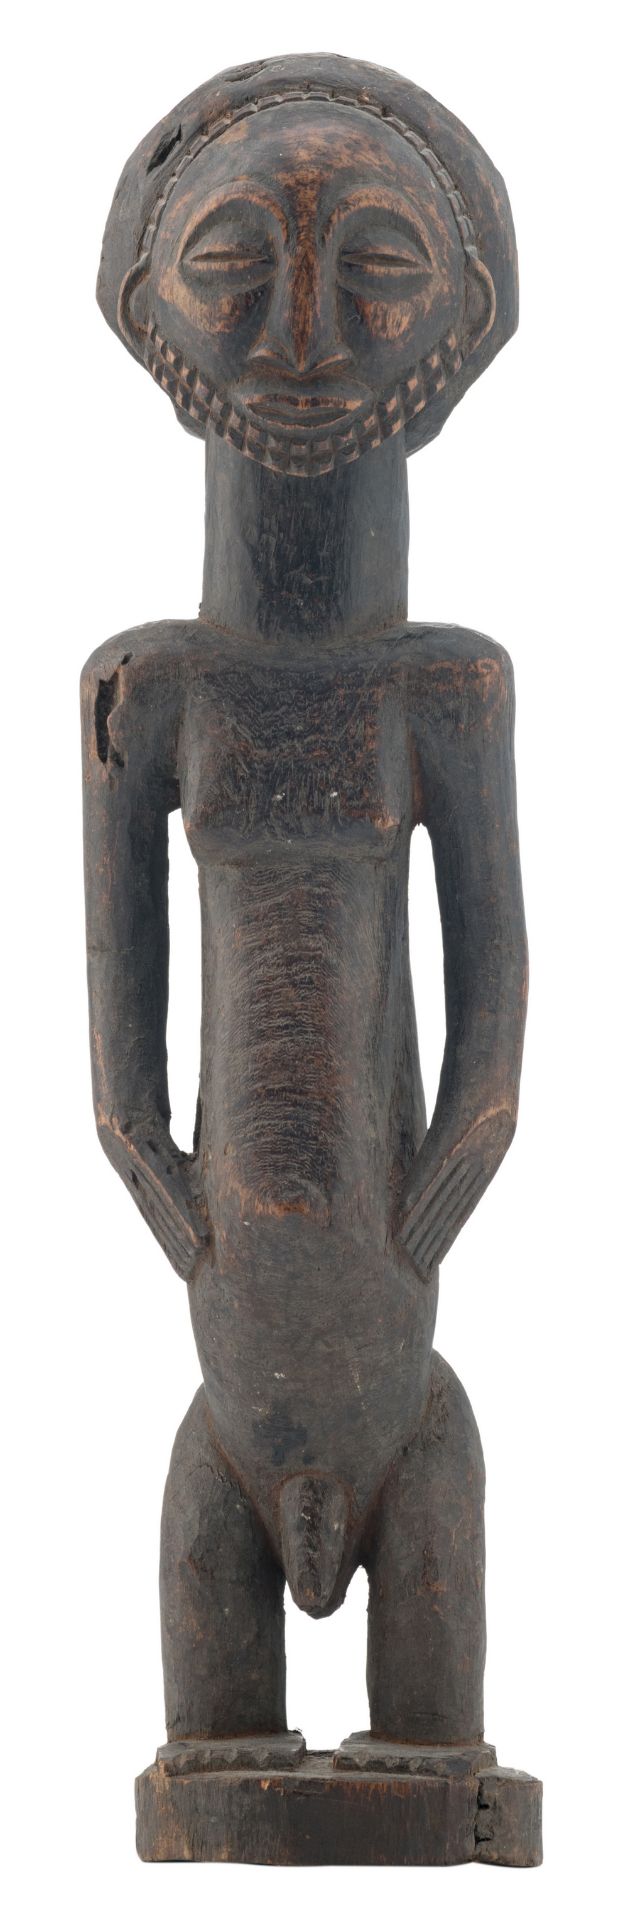 An African wooden sculpture depicting a standing male figure, possibly a chief or an ancestor (